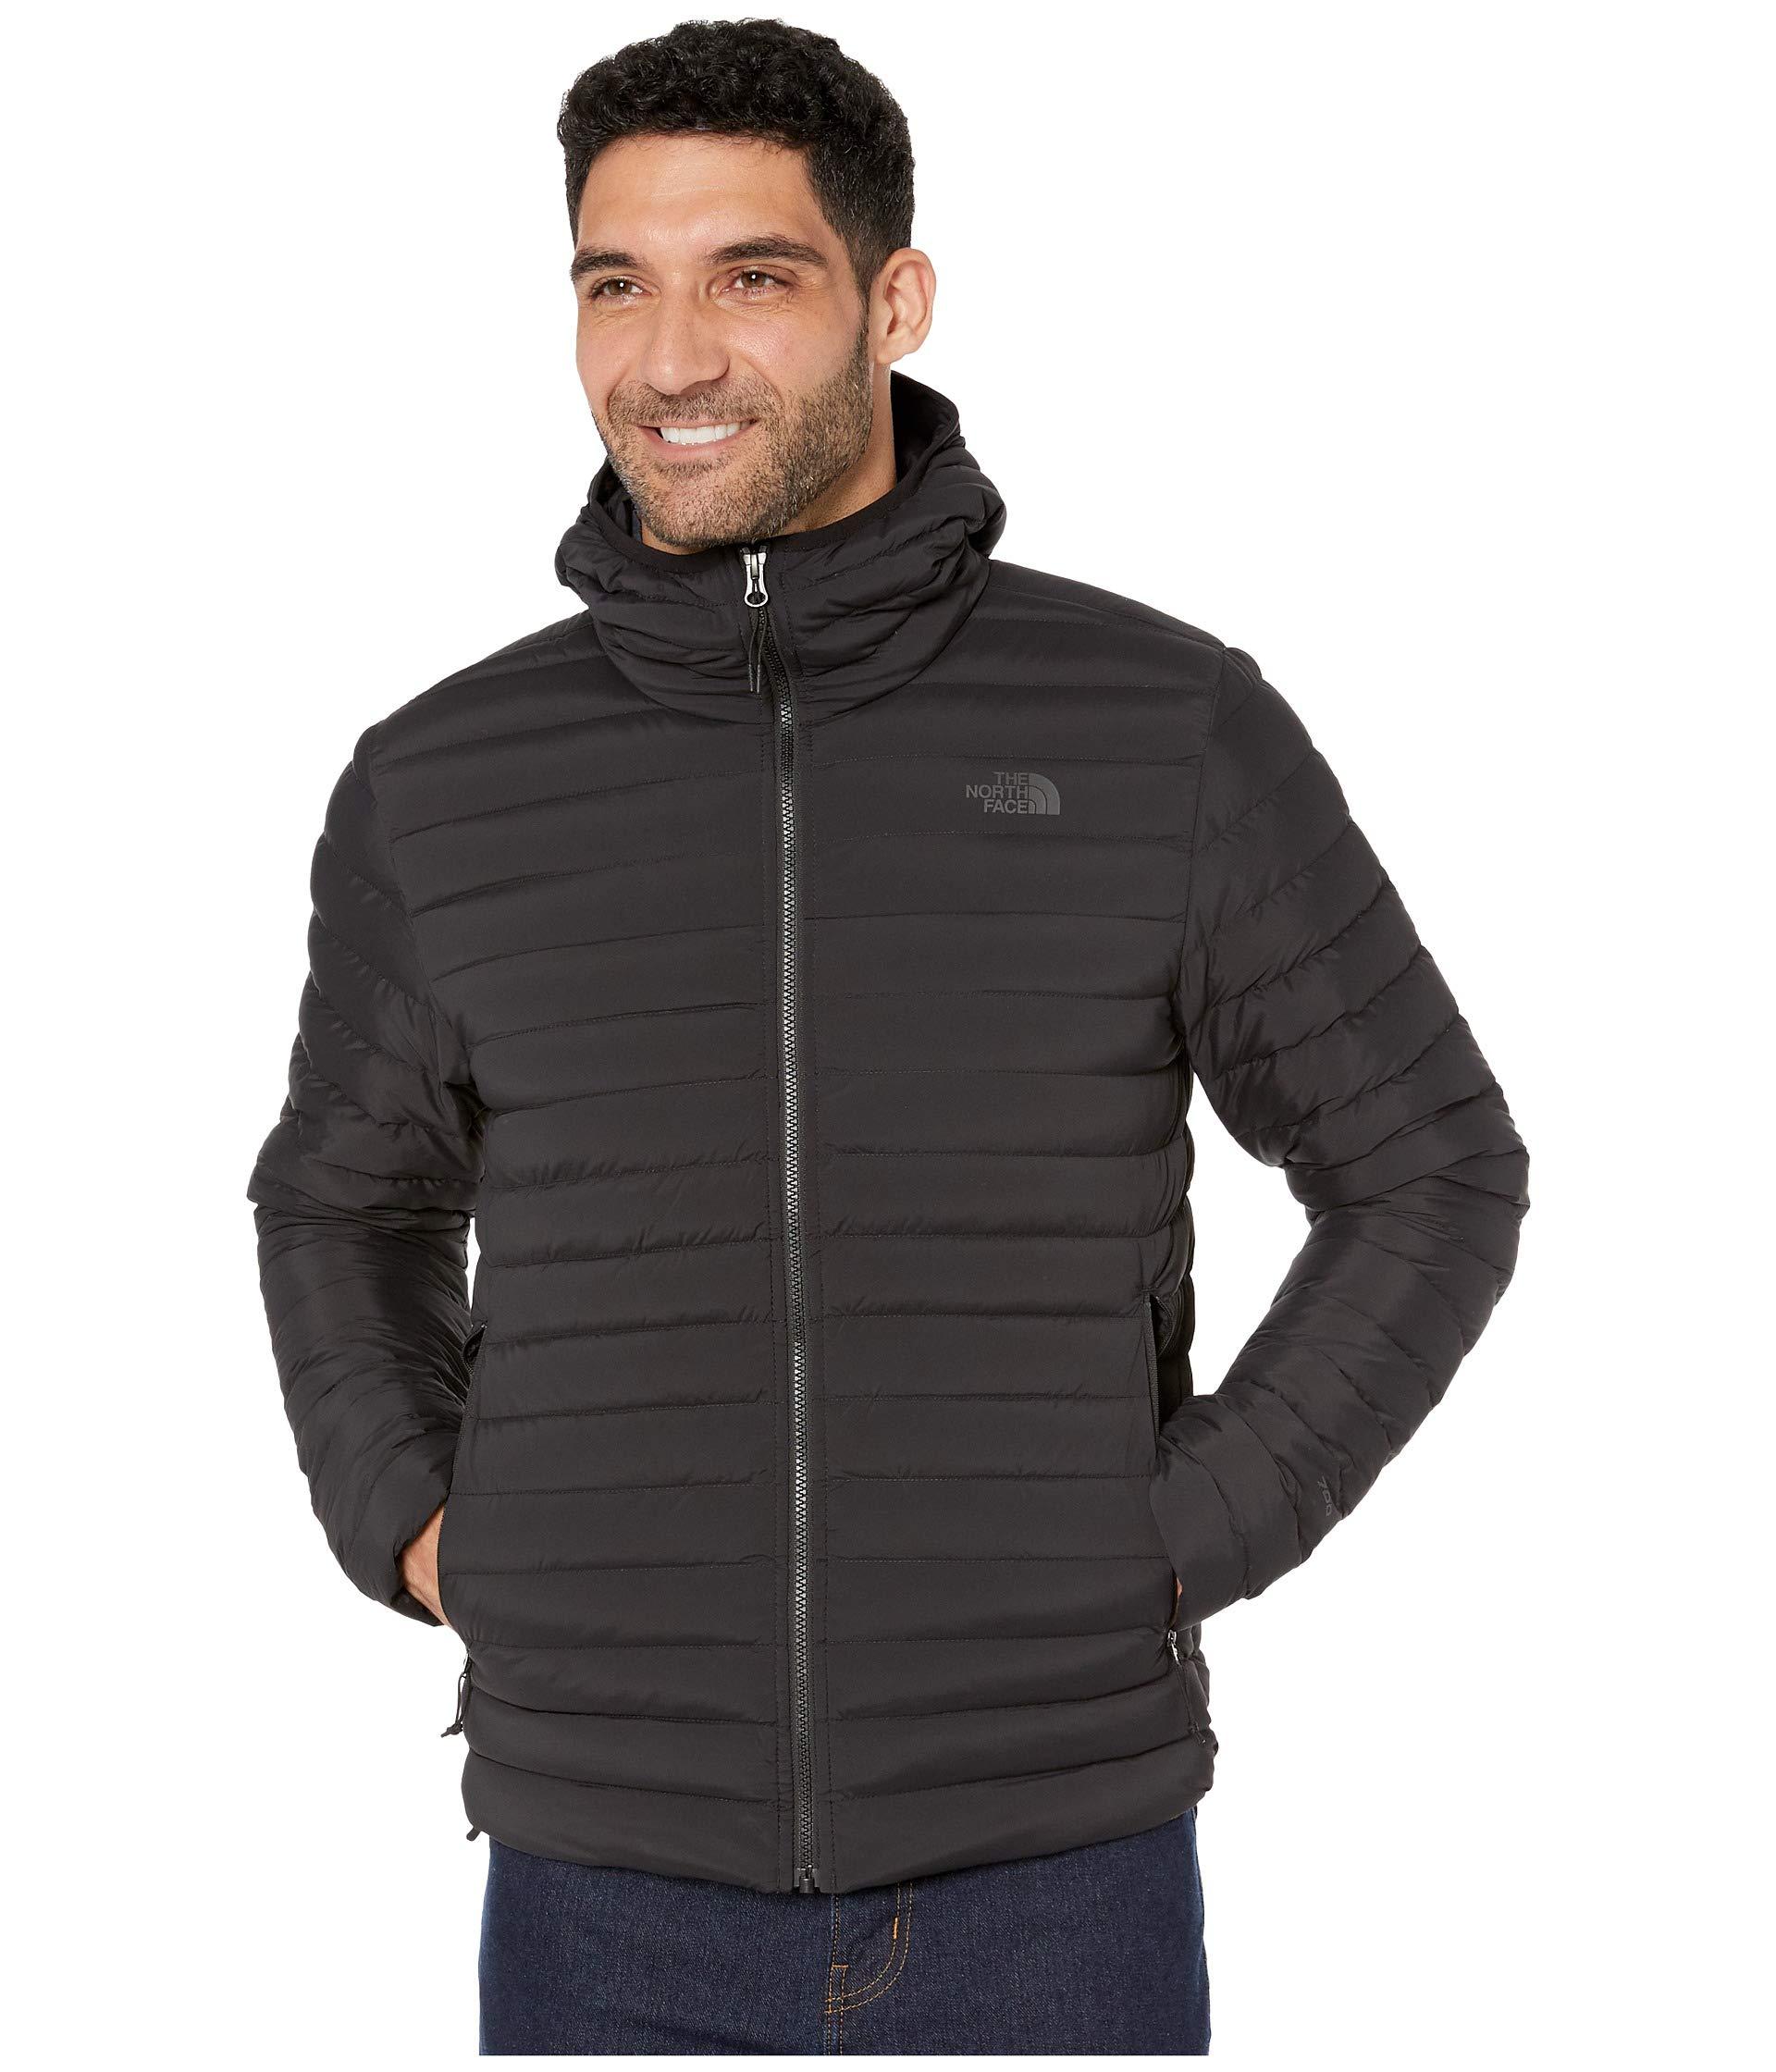 The North Face Goose Stretch Down Hoodie in Black for Men - Lyst